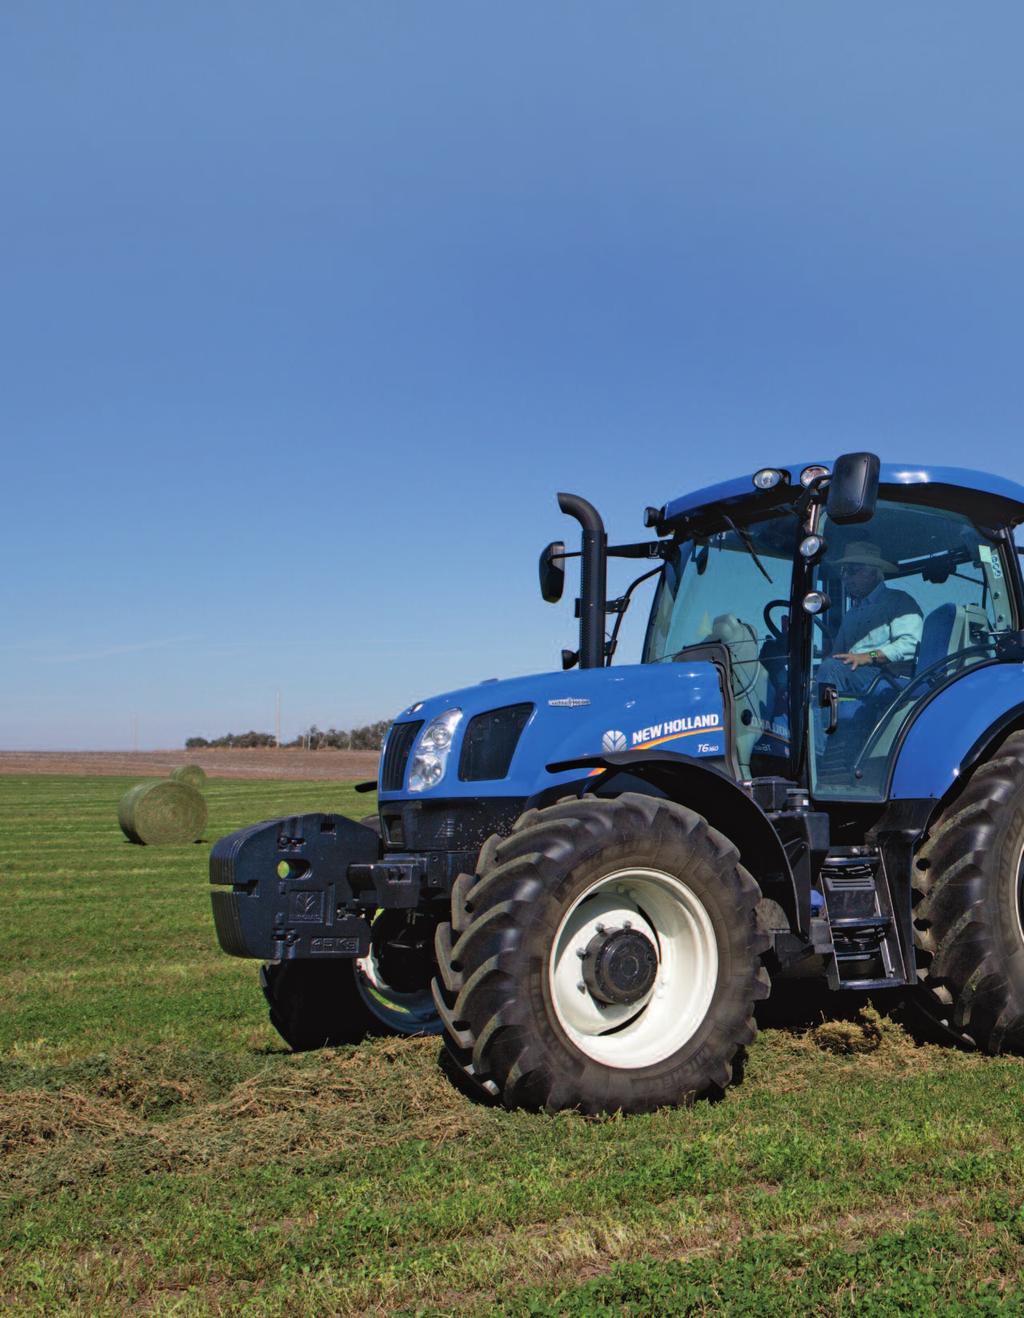 2 3 PURE POWER AND ULTIMATE EFFICIENCY FOR MIXED FARMERS When it comes to a mixed farmer's tractor, New Holland understands that no two tasks are truly alike.